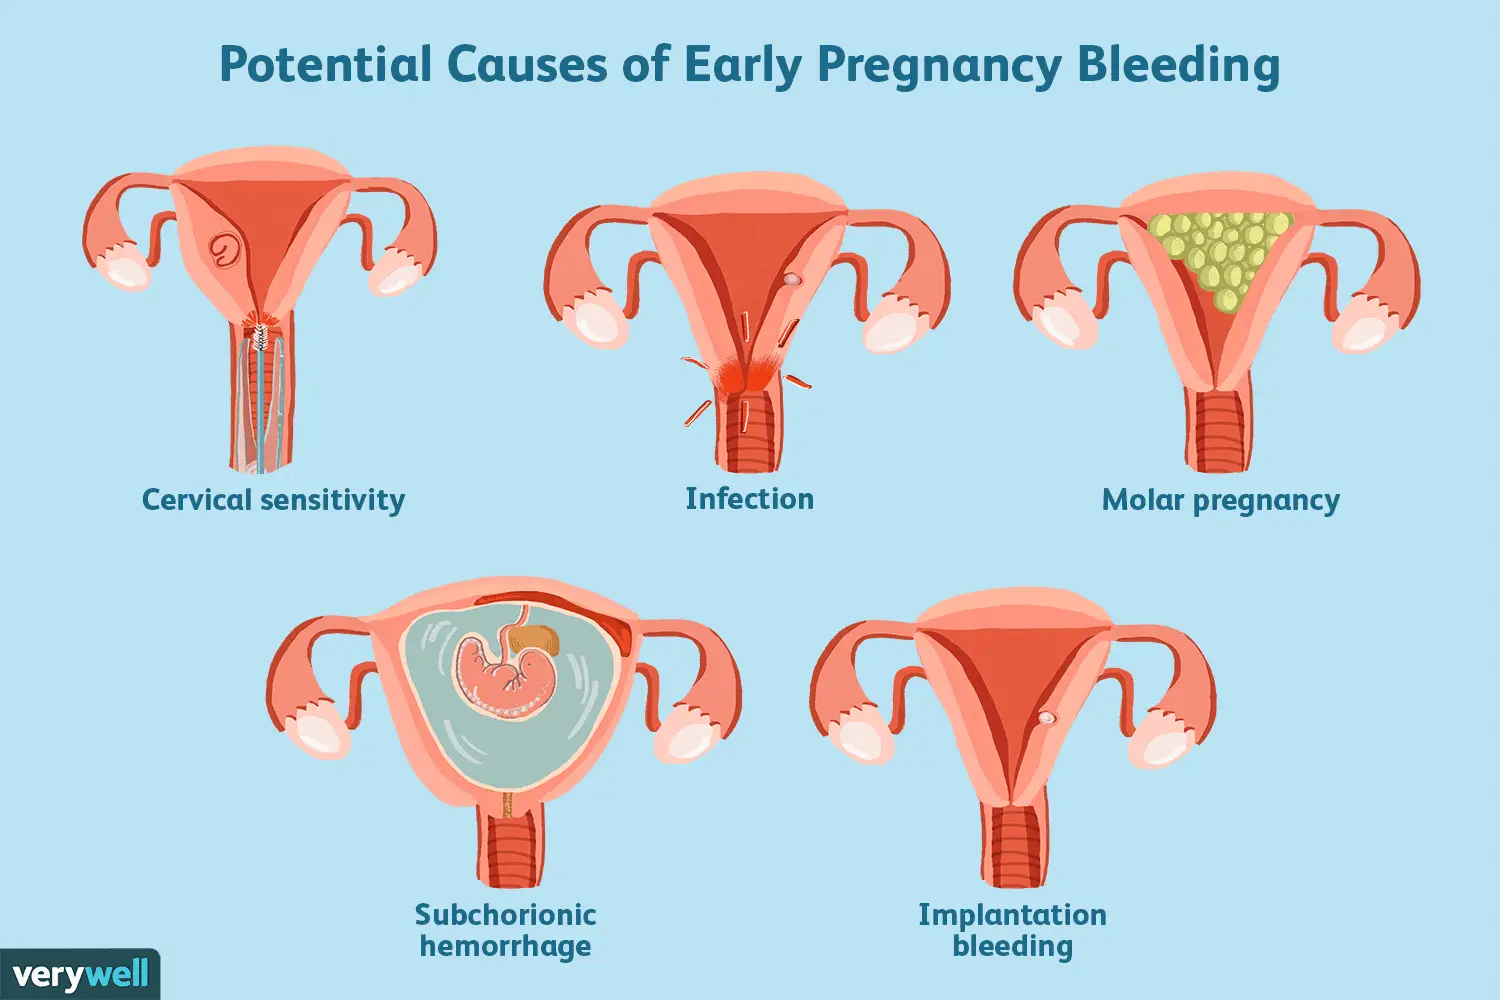 Does Early Pregnancy Bleeding Mean a Miscarriage?